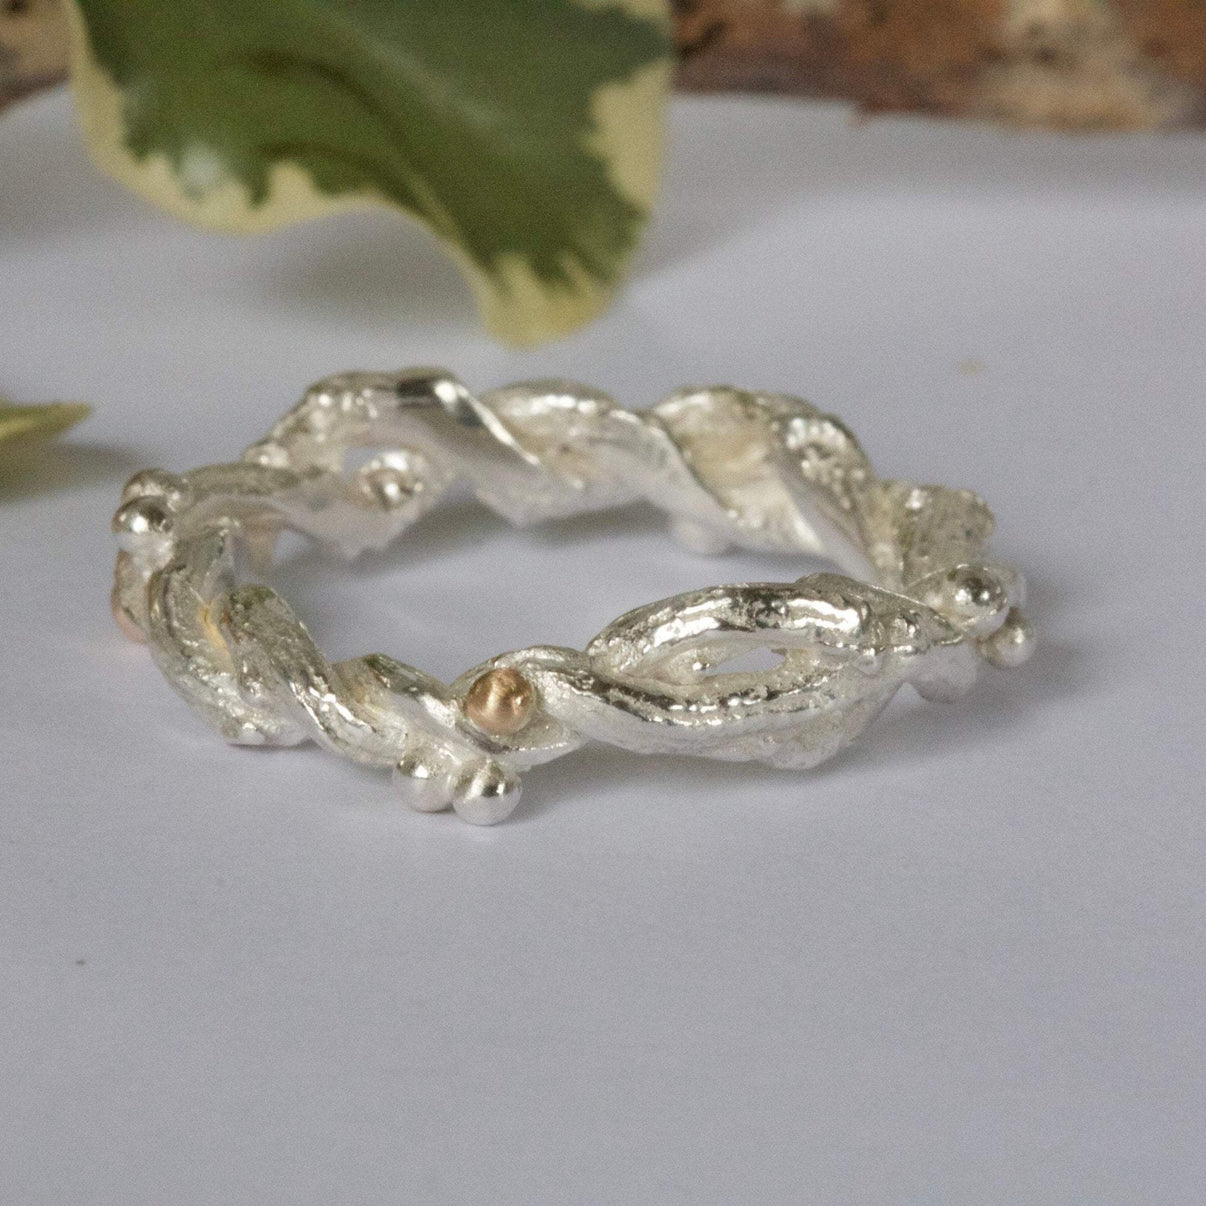 Organic Silver Band Ring-Entwined Forest Twig Ring-Alternative Wedding ...